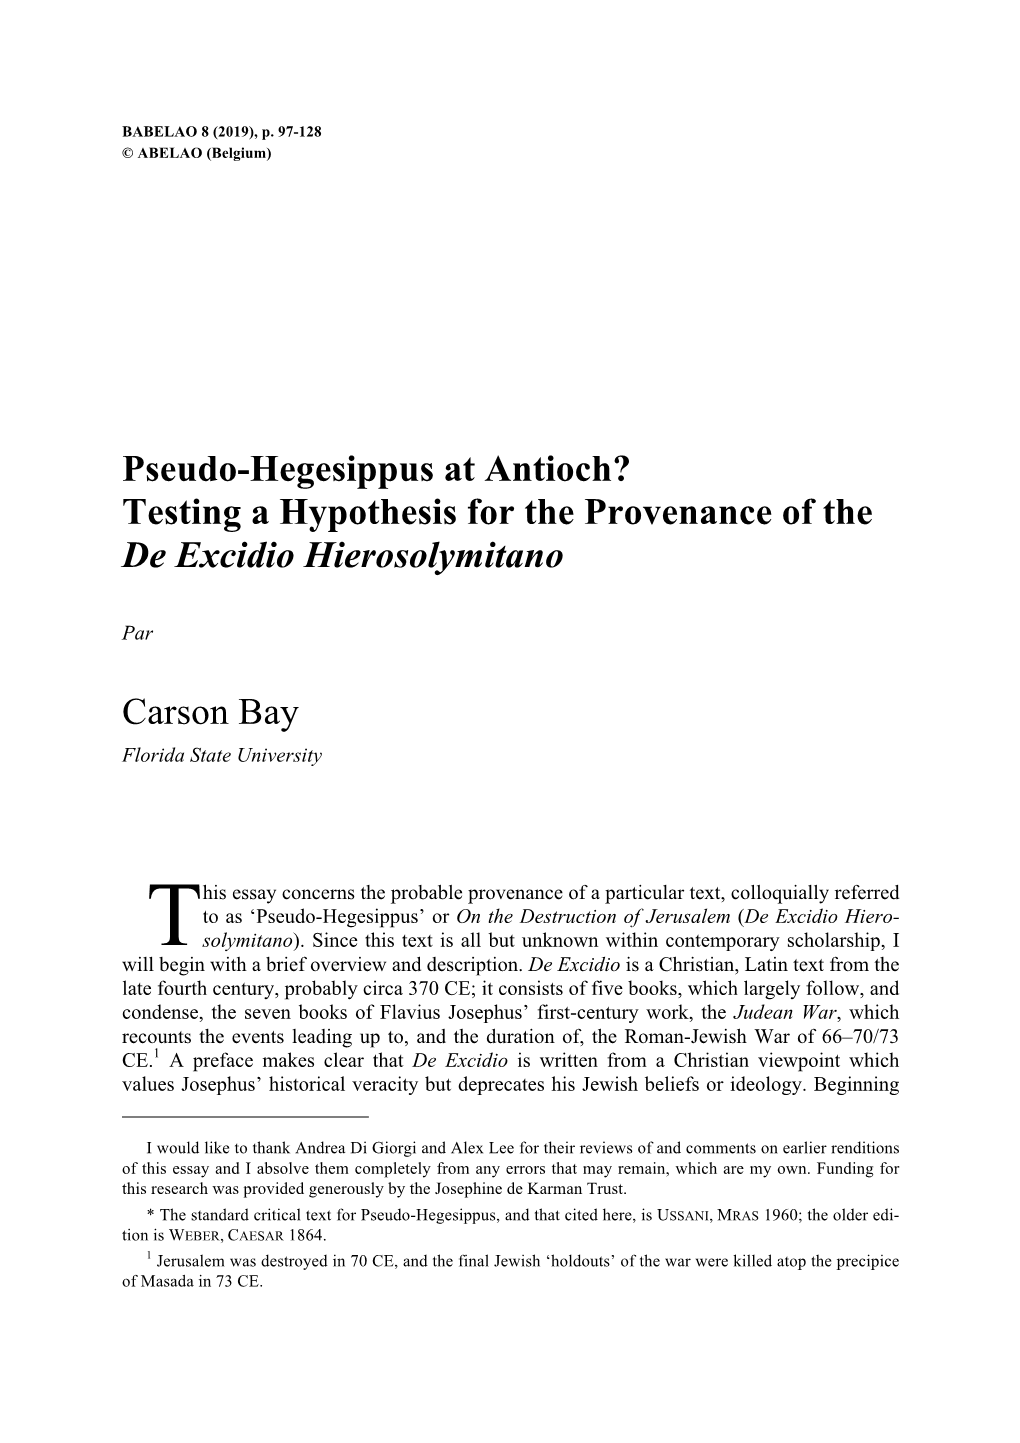 Pseudo-Hegesippus at Antioch? Testing a Hypothesis for the Provenance of the De Excidio Hierosolymitano